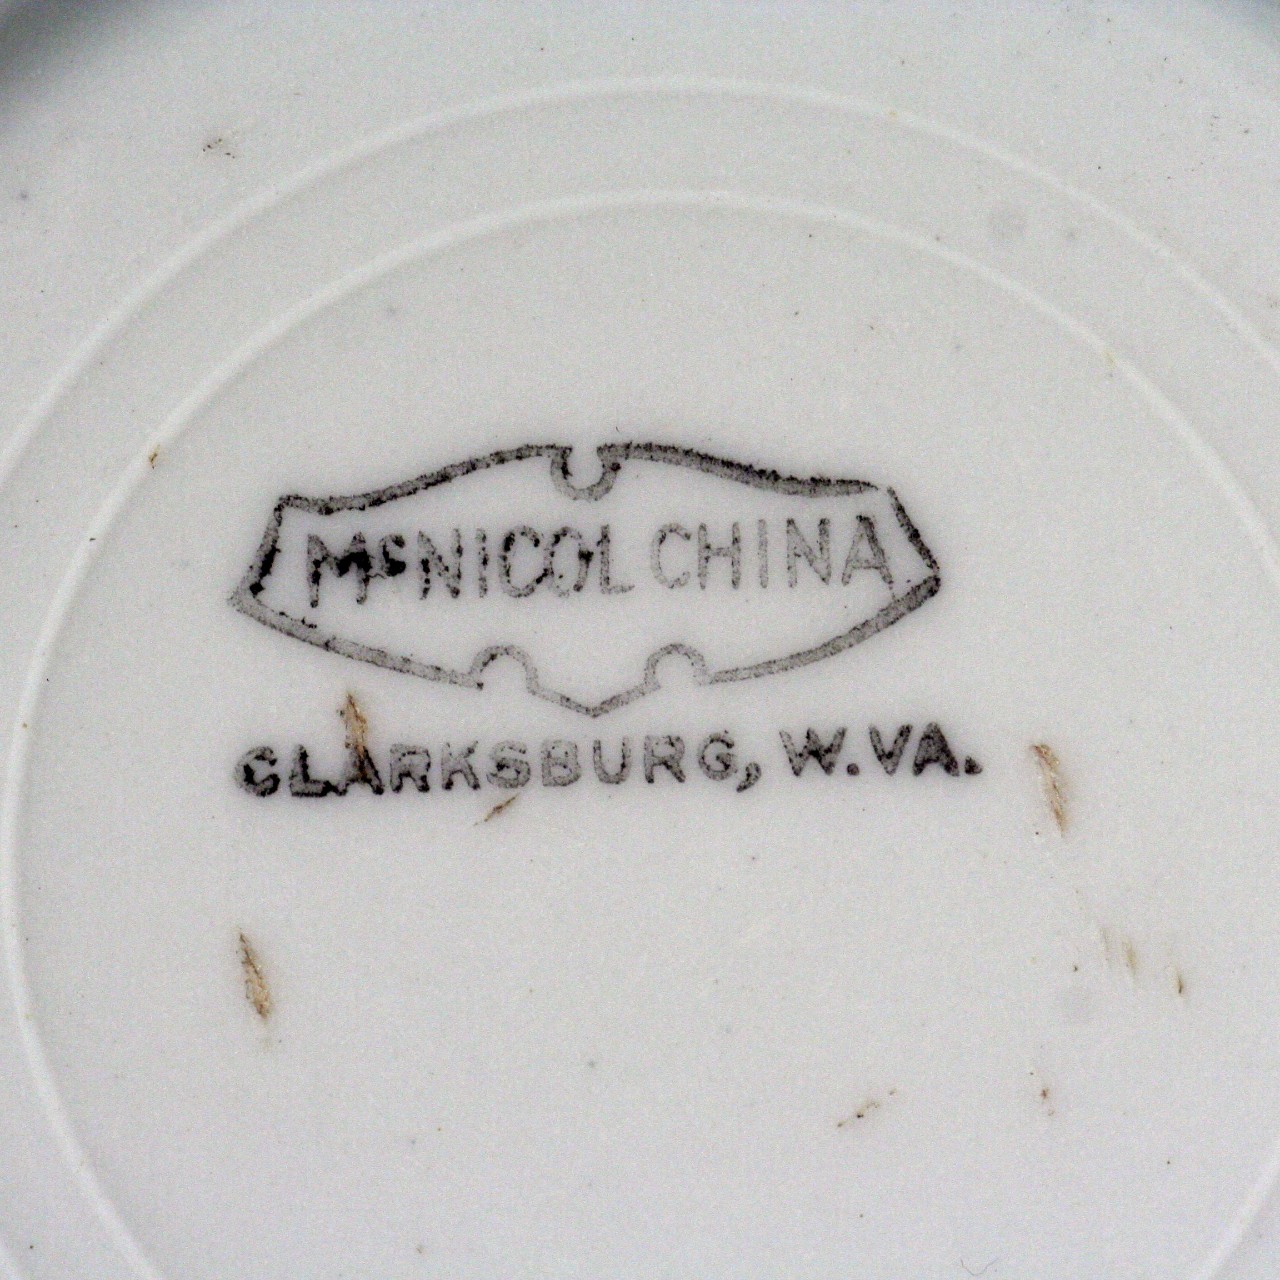 <p>Close up of the cup's maker’s mark. It is “McNicol China” surrounded by a simple black line motif. Underneath the motif is the words “Clarksburg. W. Va.”.</p>
